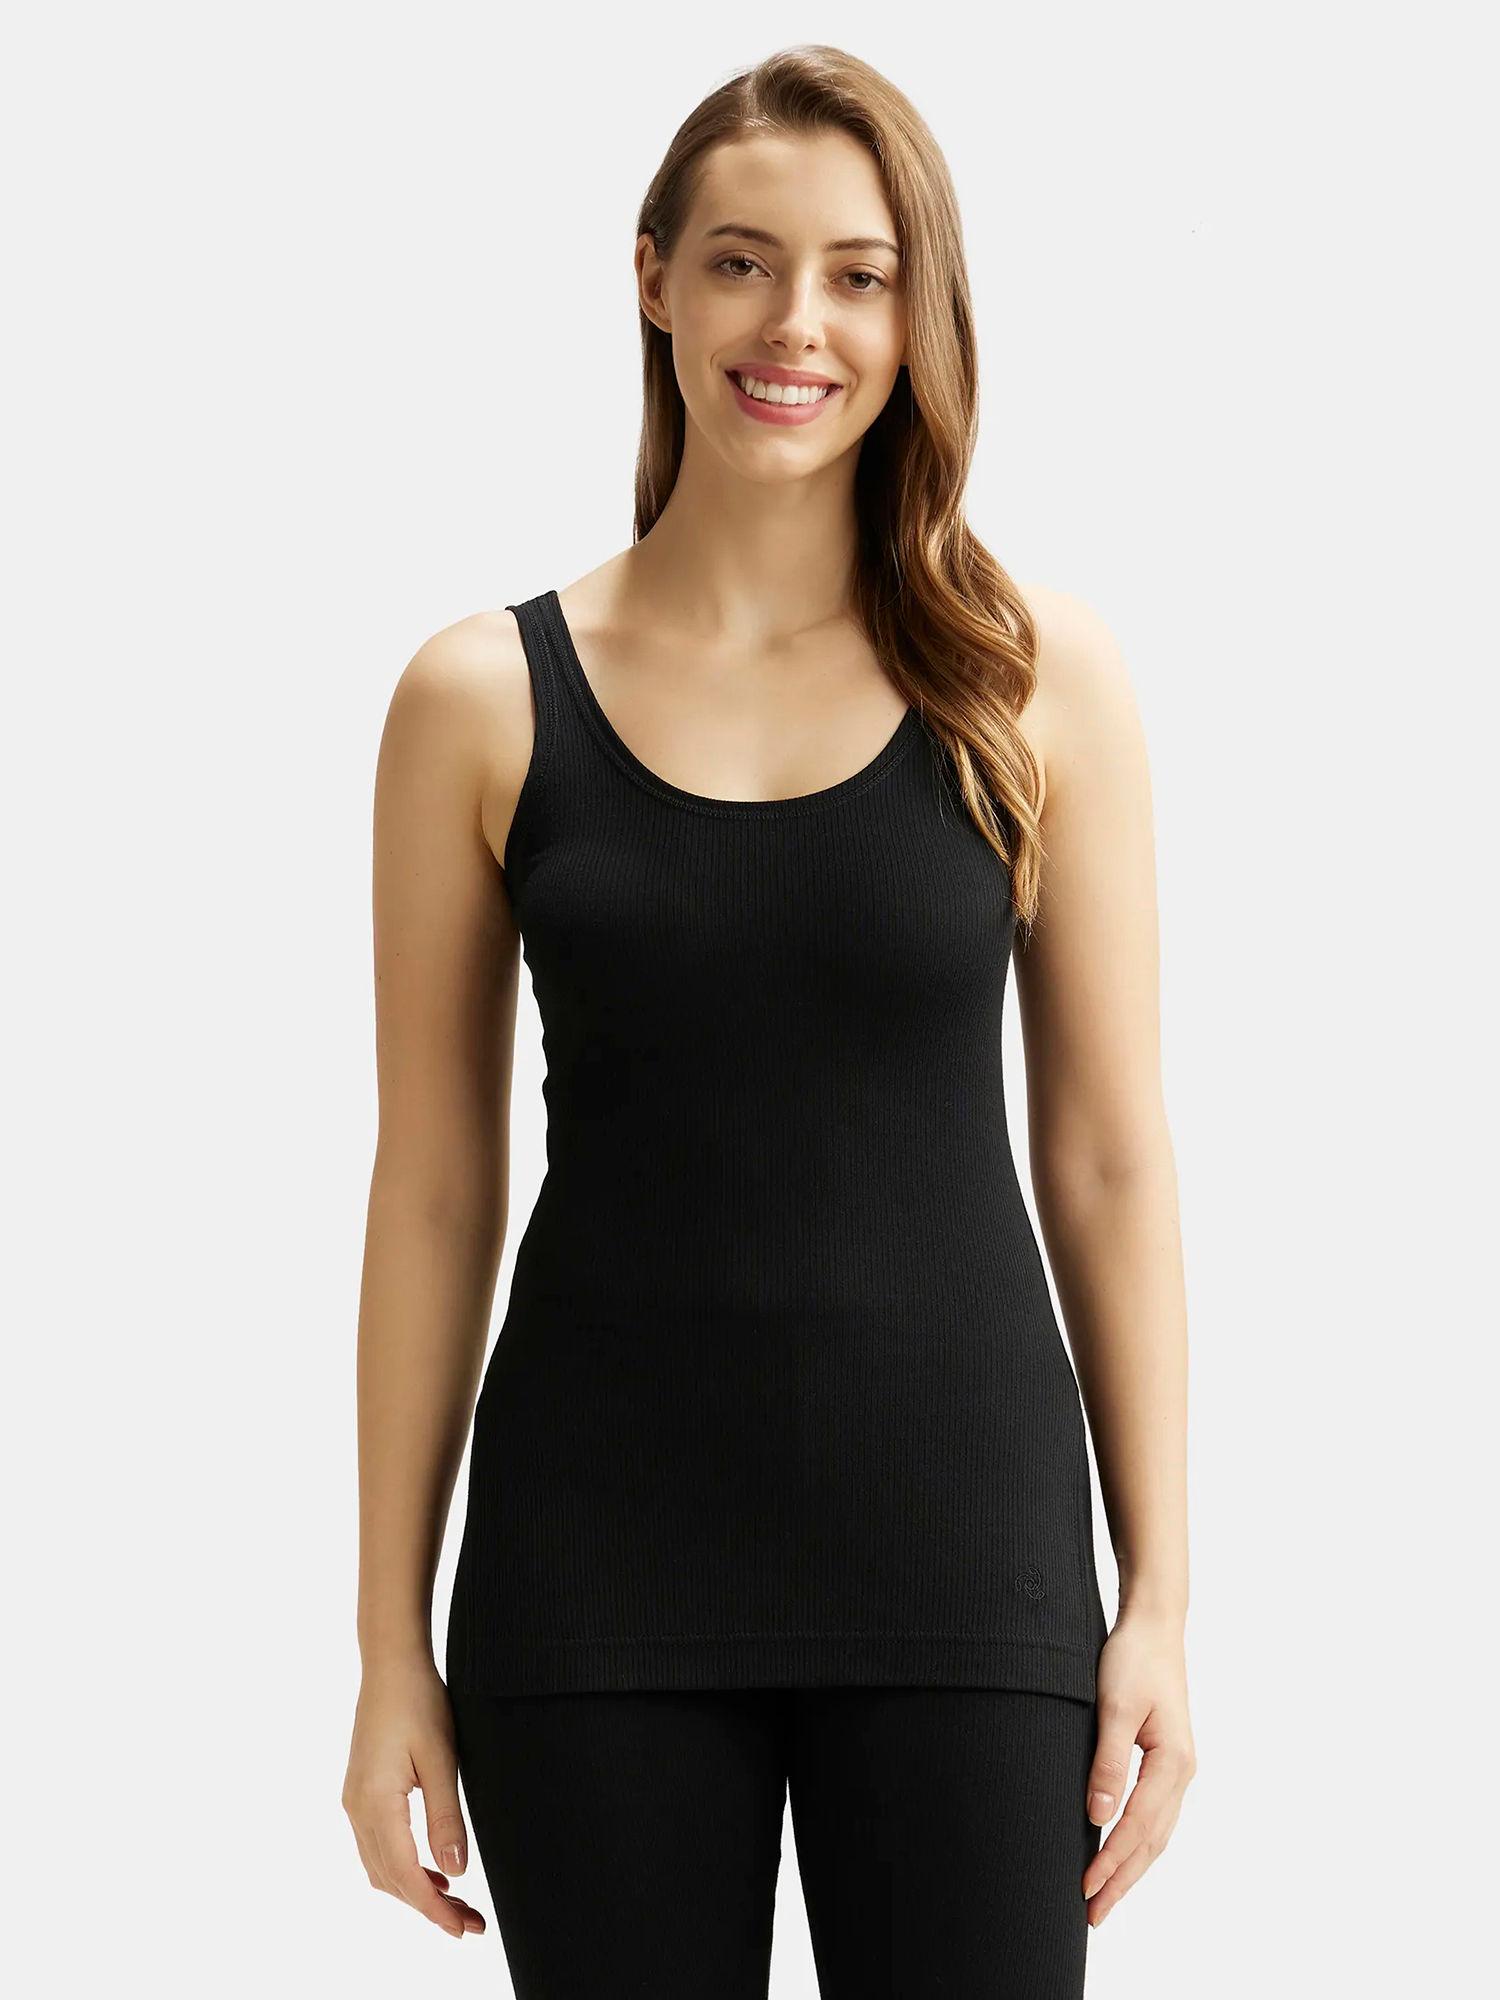 black thermal camisole : style number # 2500